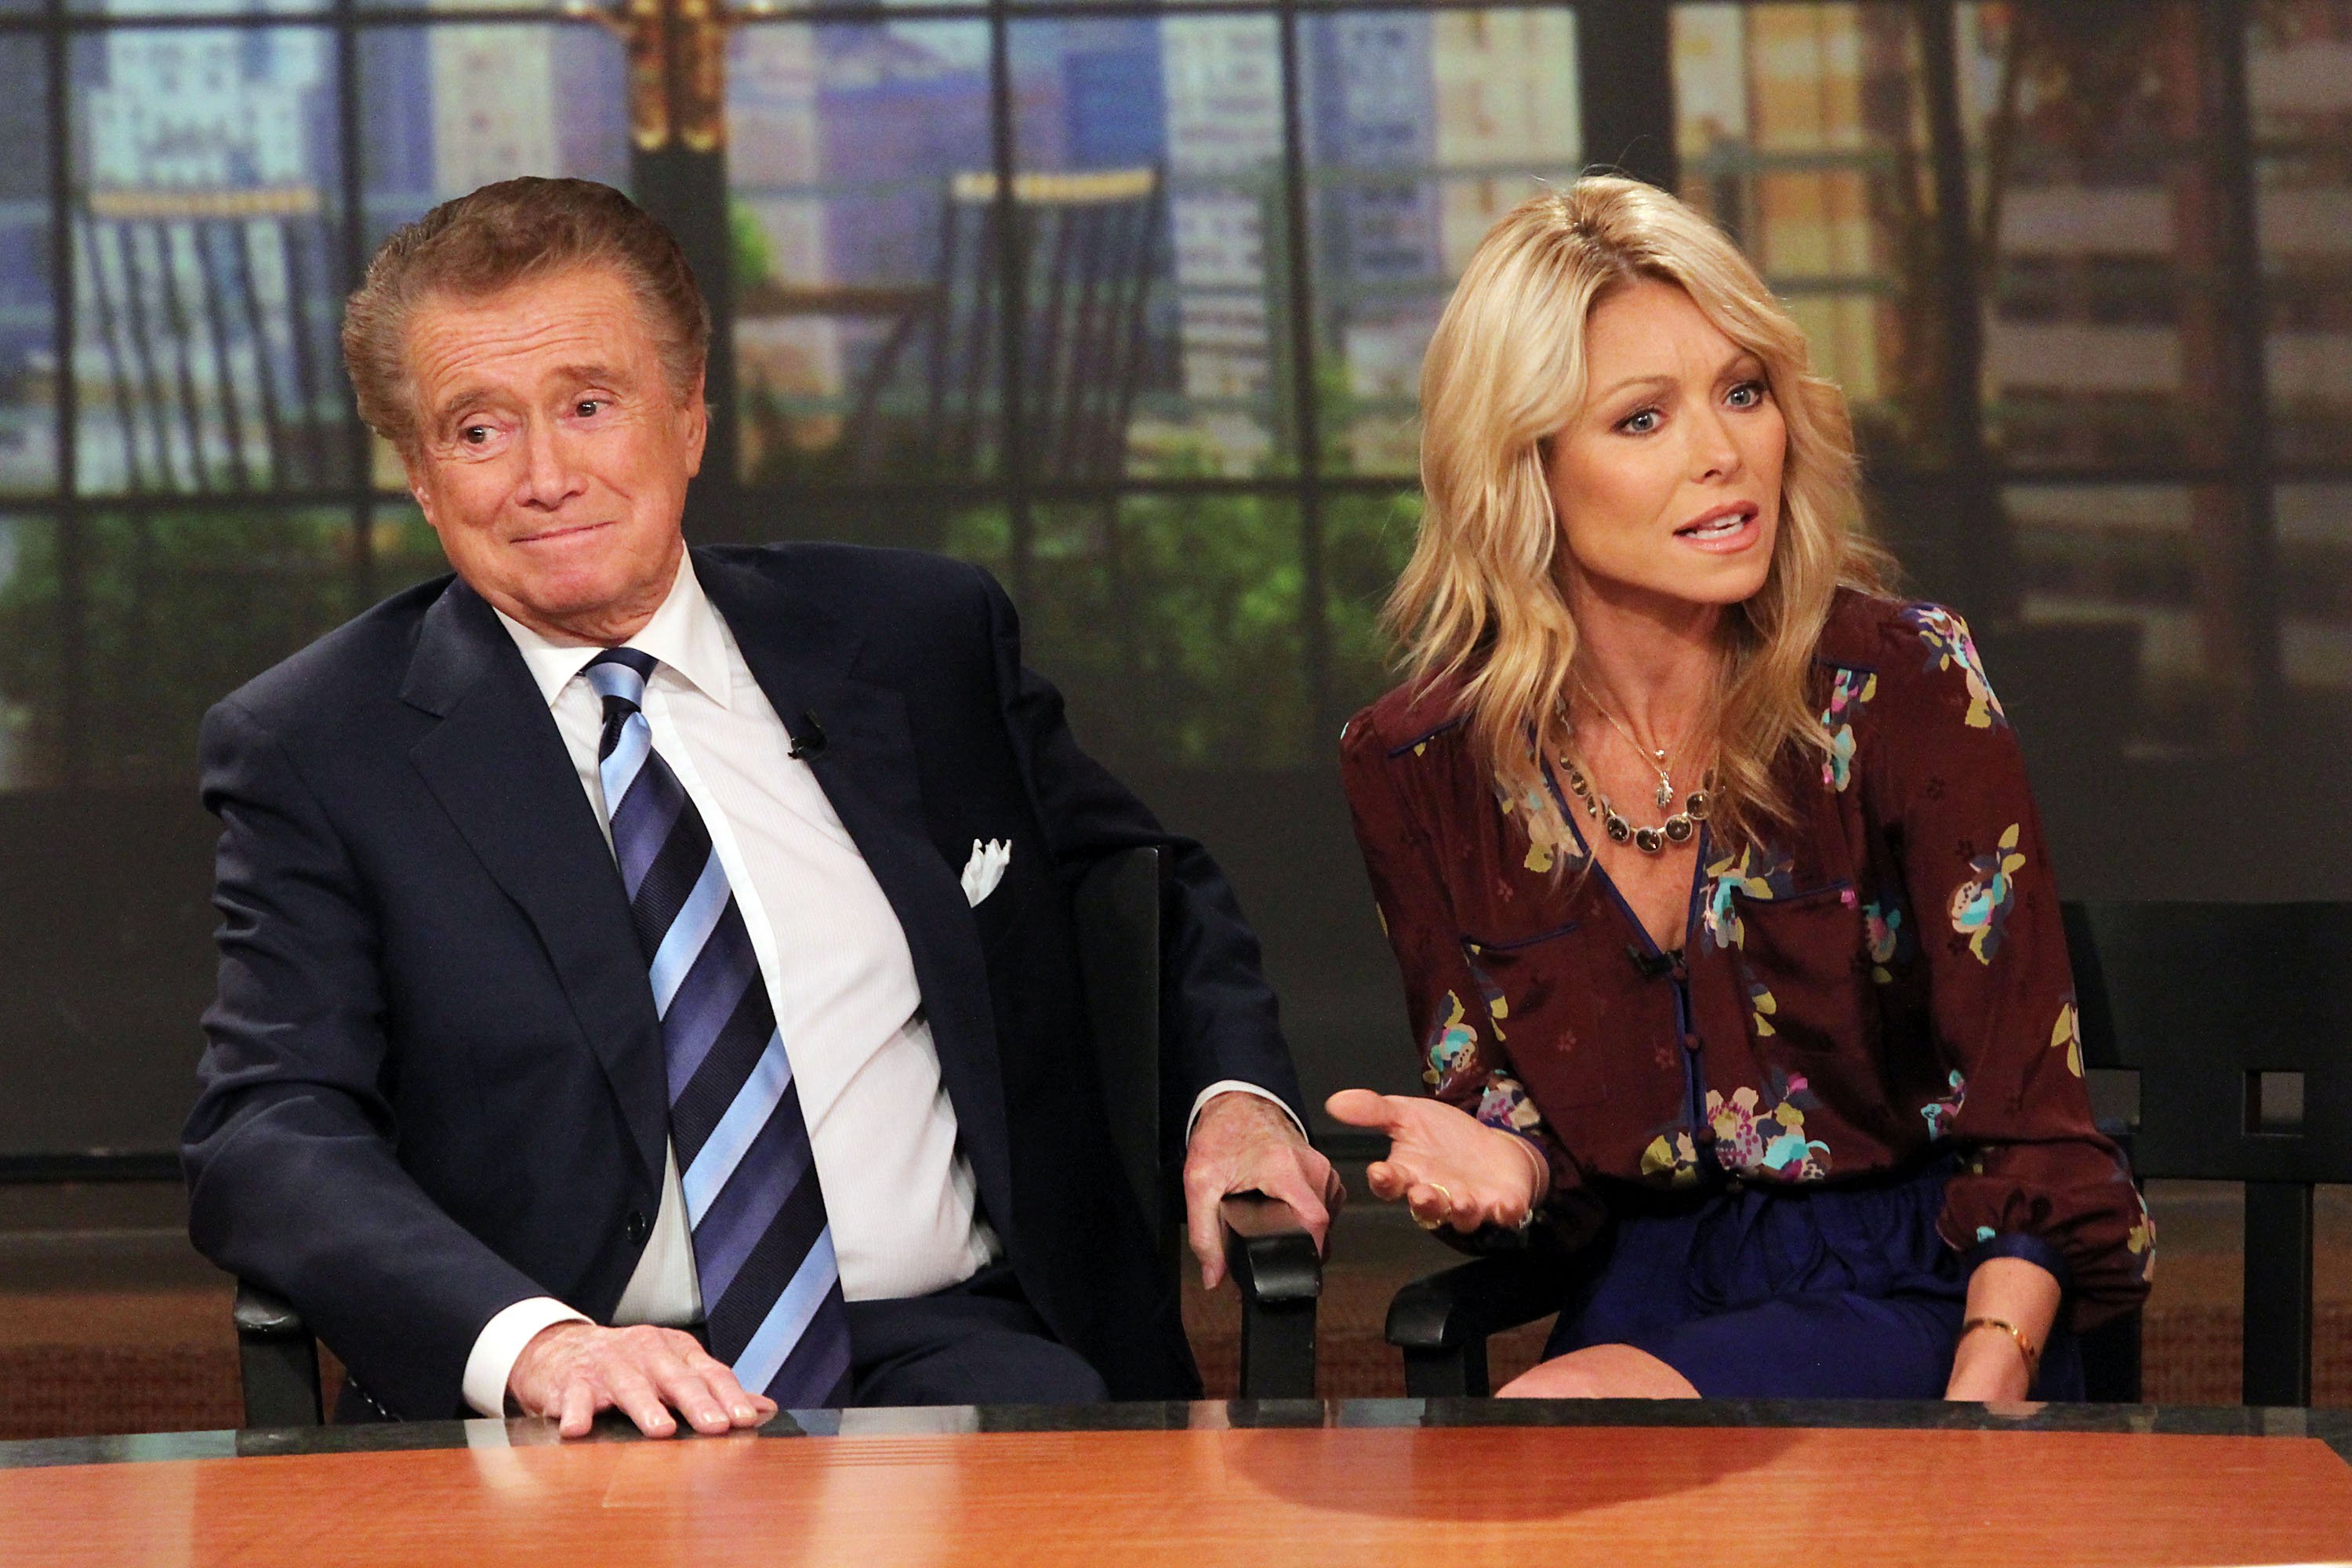  Regis Philbin and Kelly Ripa during a press conference on Regis's departure from "LIVE! with Regis and Kelly" at ABC Studios, in 2011, New York City. | Photo: Getty Images